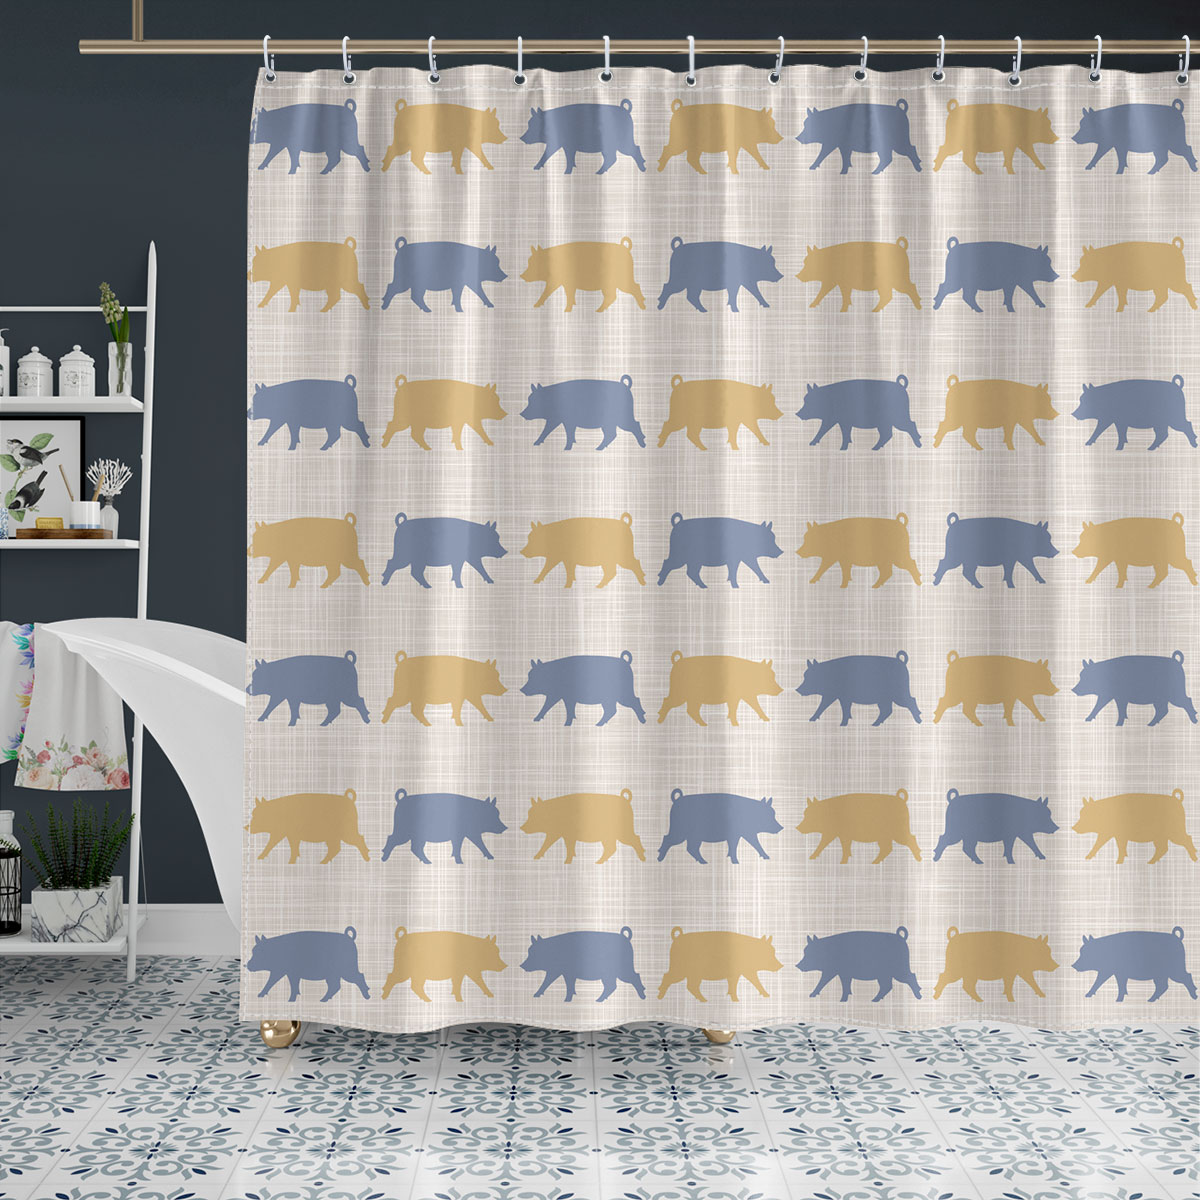 Pig Silhouette Pattern Shower Curtain